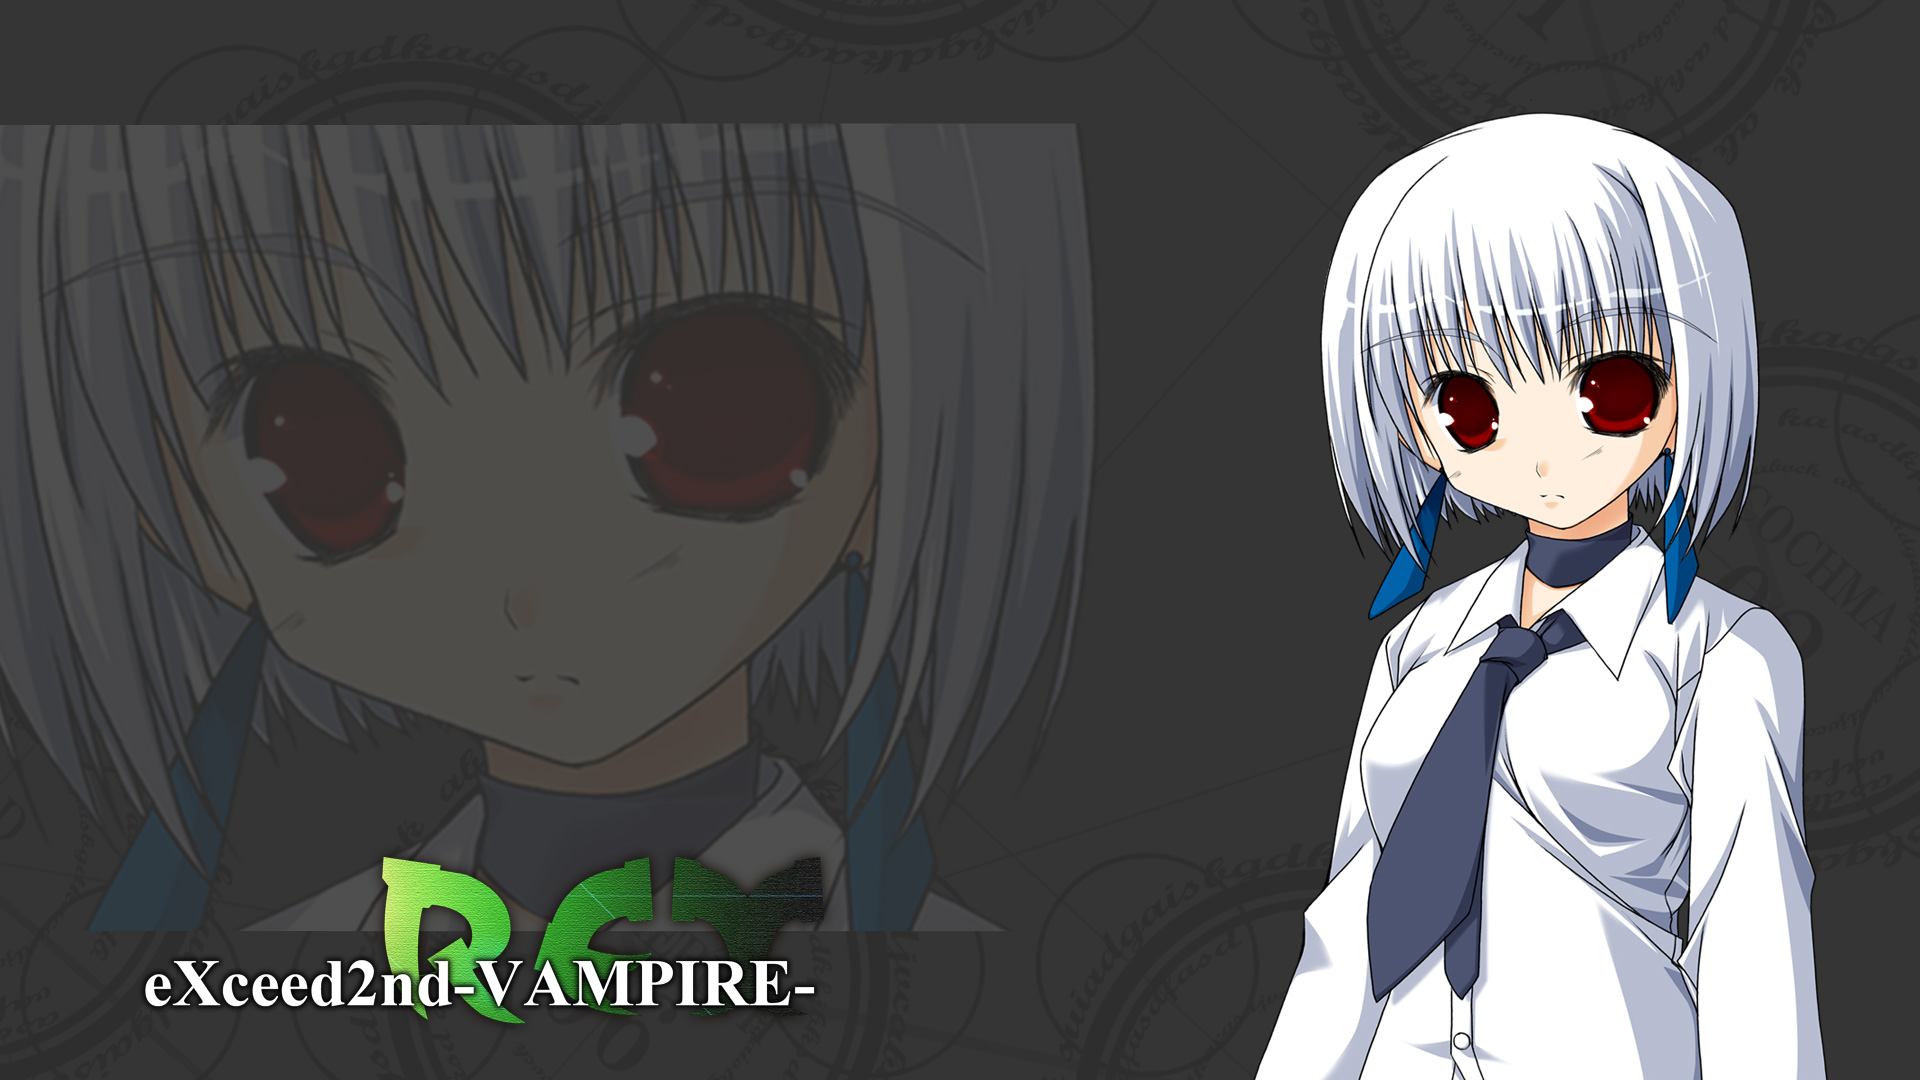 EXceed 2nd - Vampire REX Backgrounds, Compatible - PC, Mobile, Gadgets| 1920x1080 px